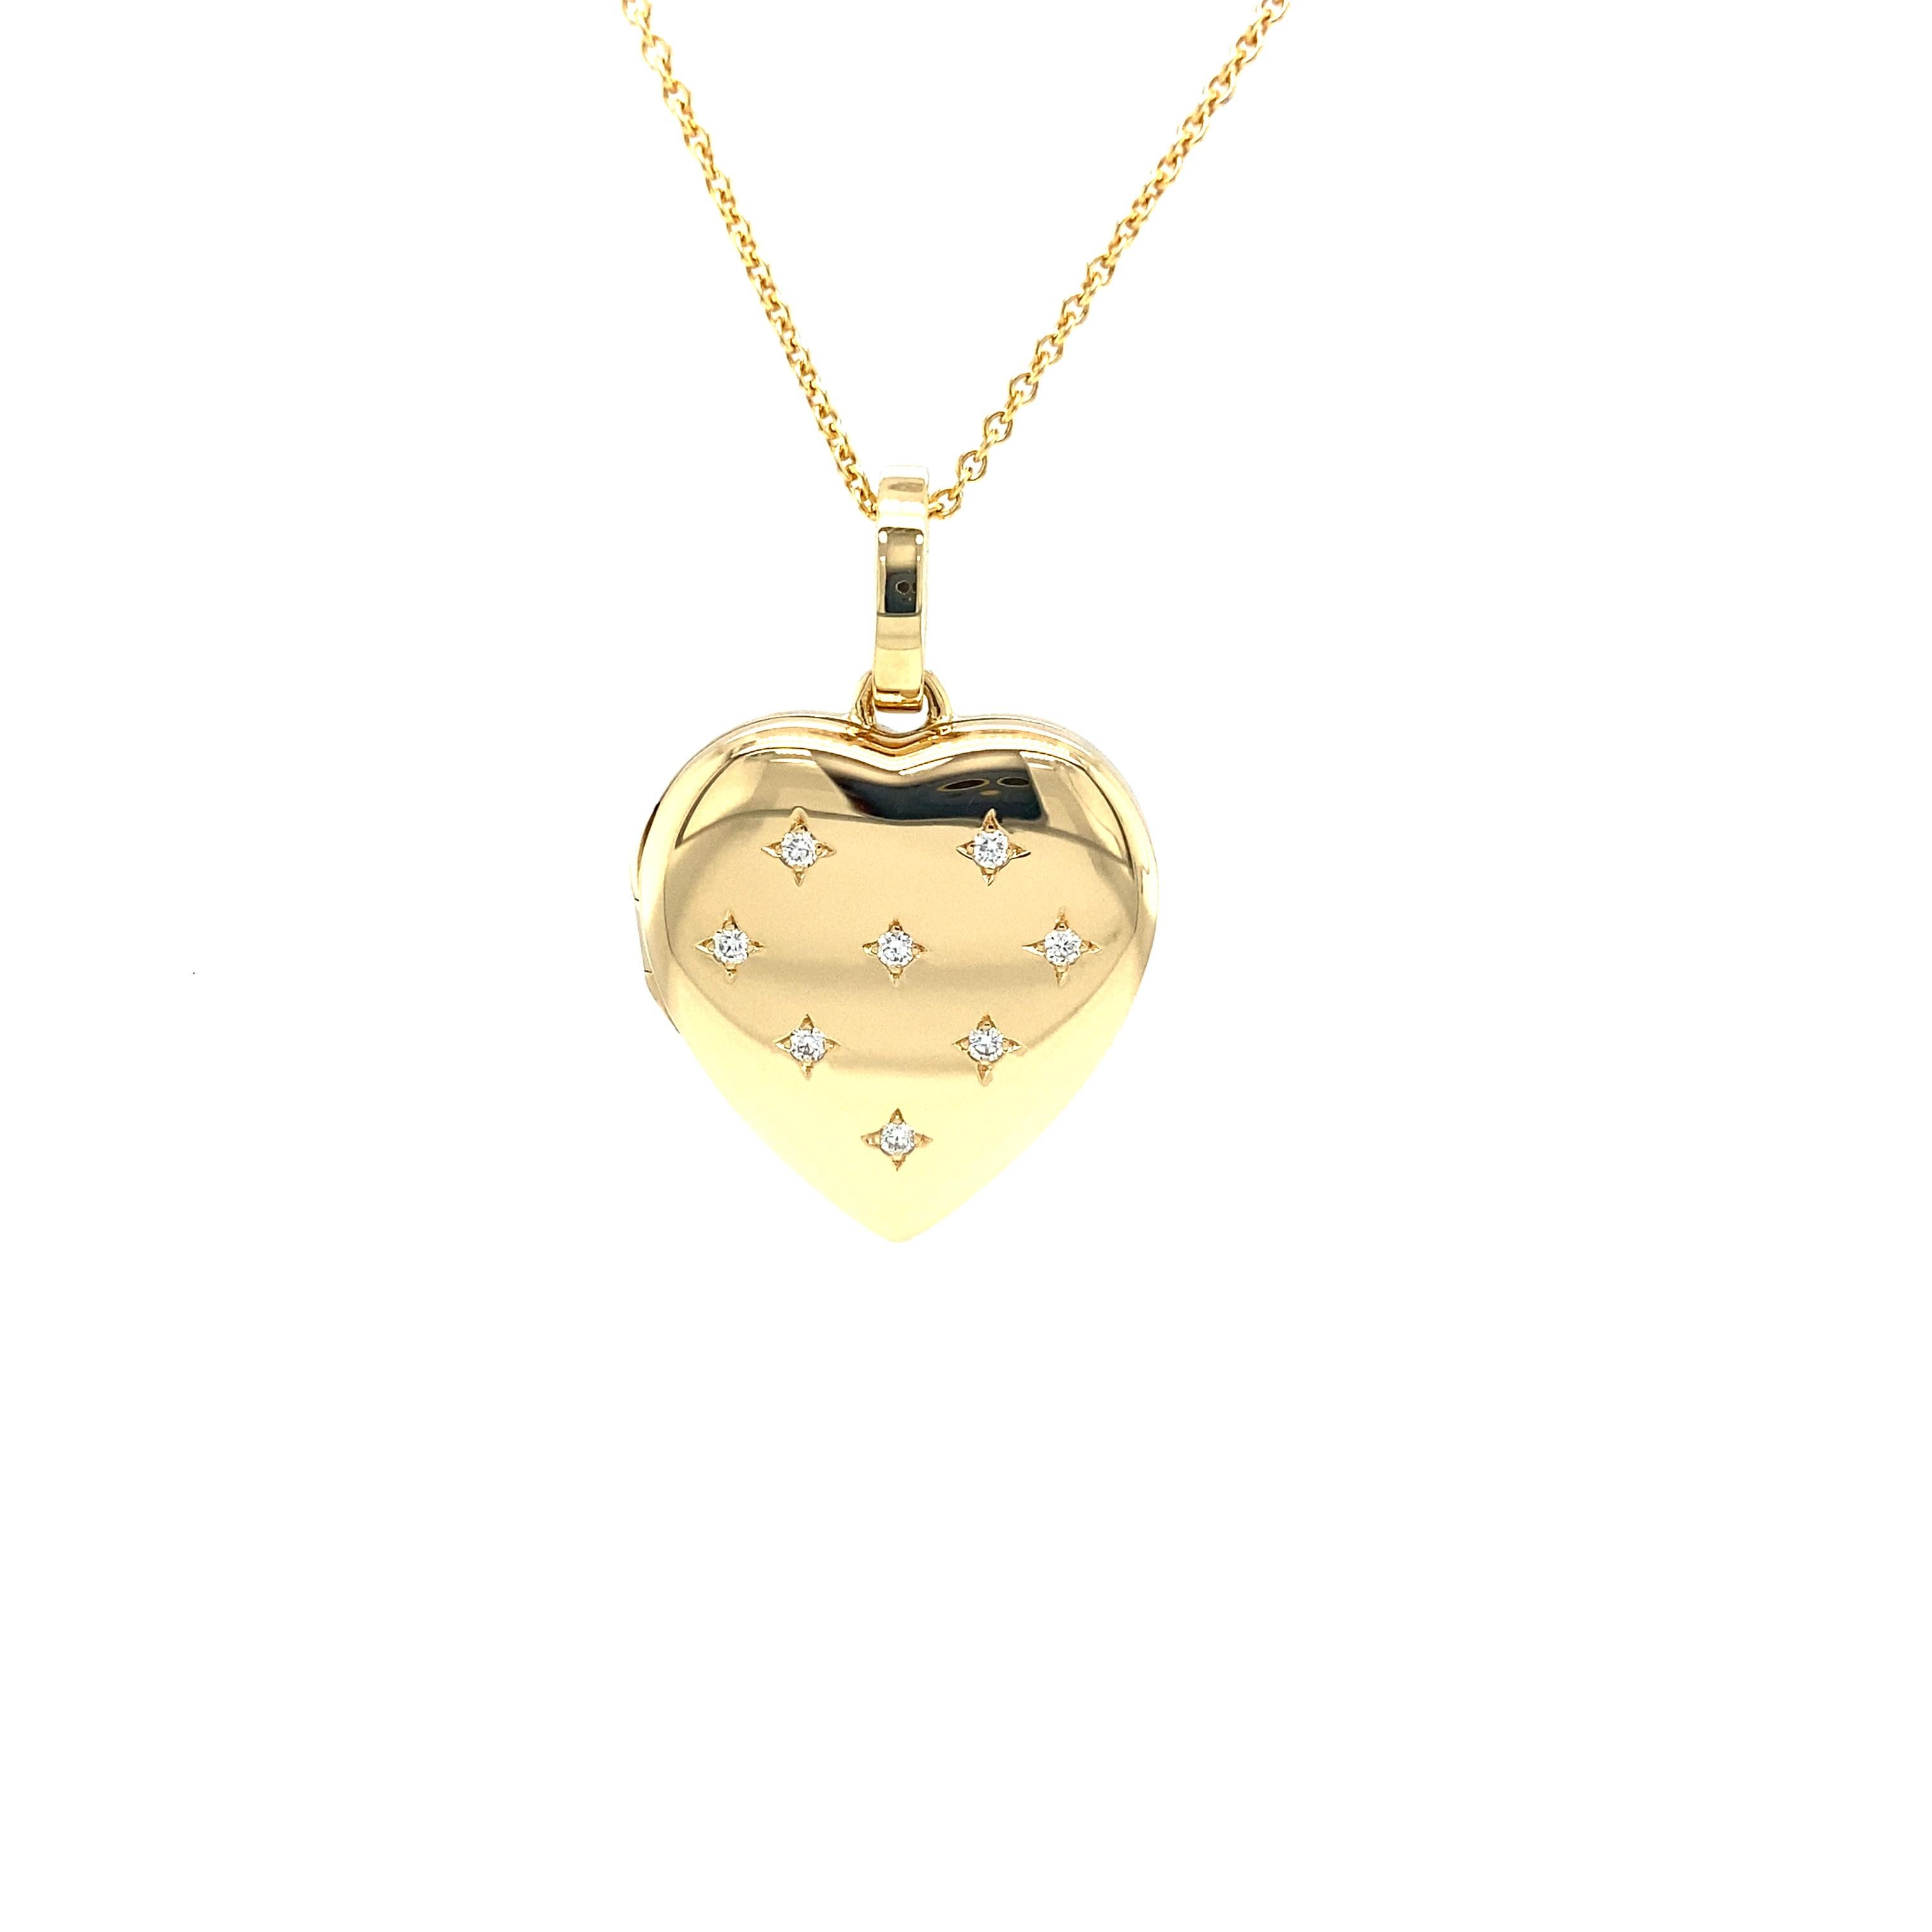 Victorian Heart Shaped Locket Pendant by Victor Mayer, 18k Yellow Gold, 8 Diamonds 0.16ct For Sale